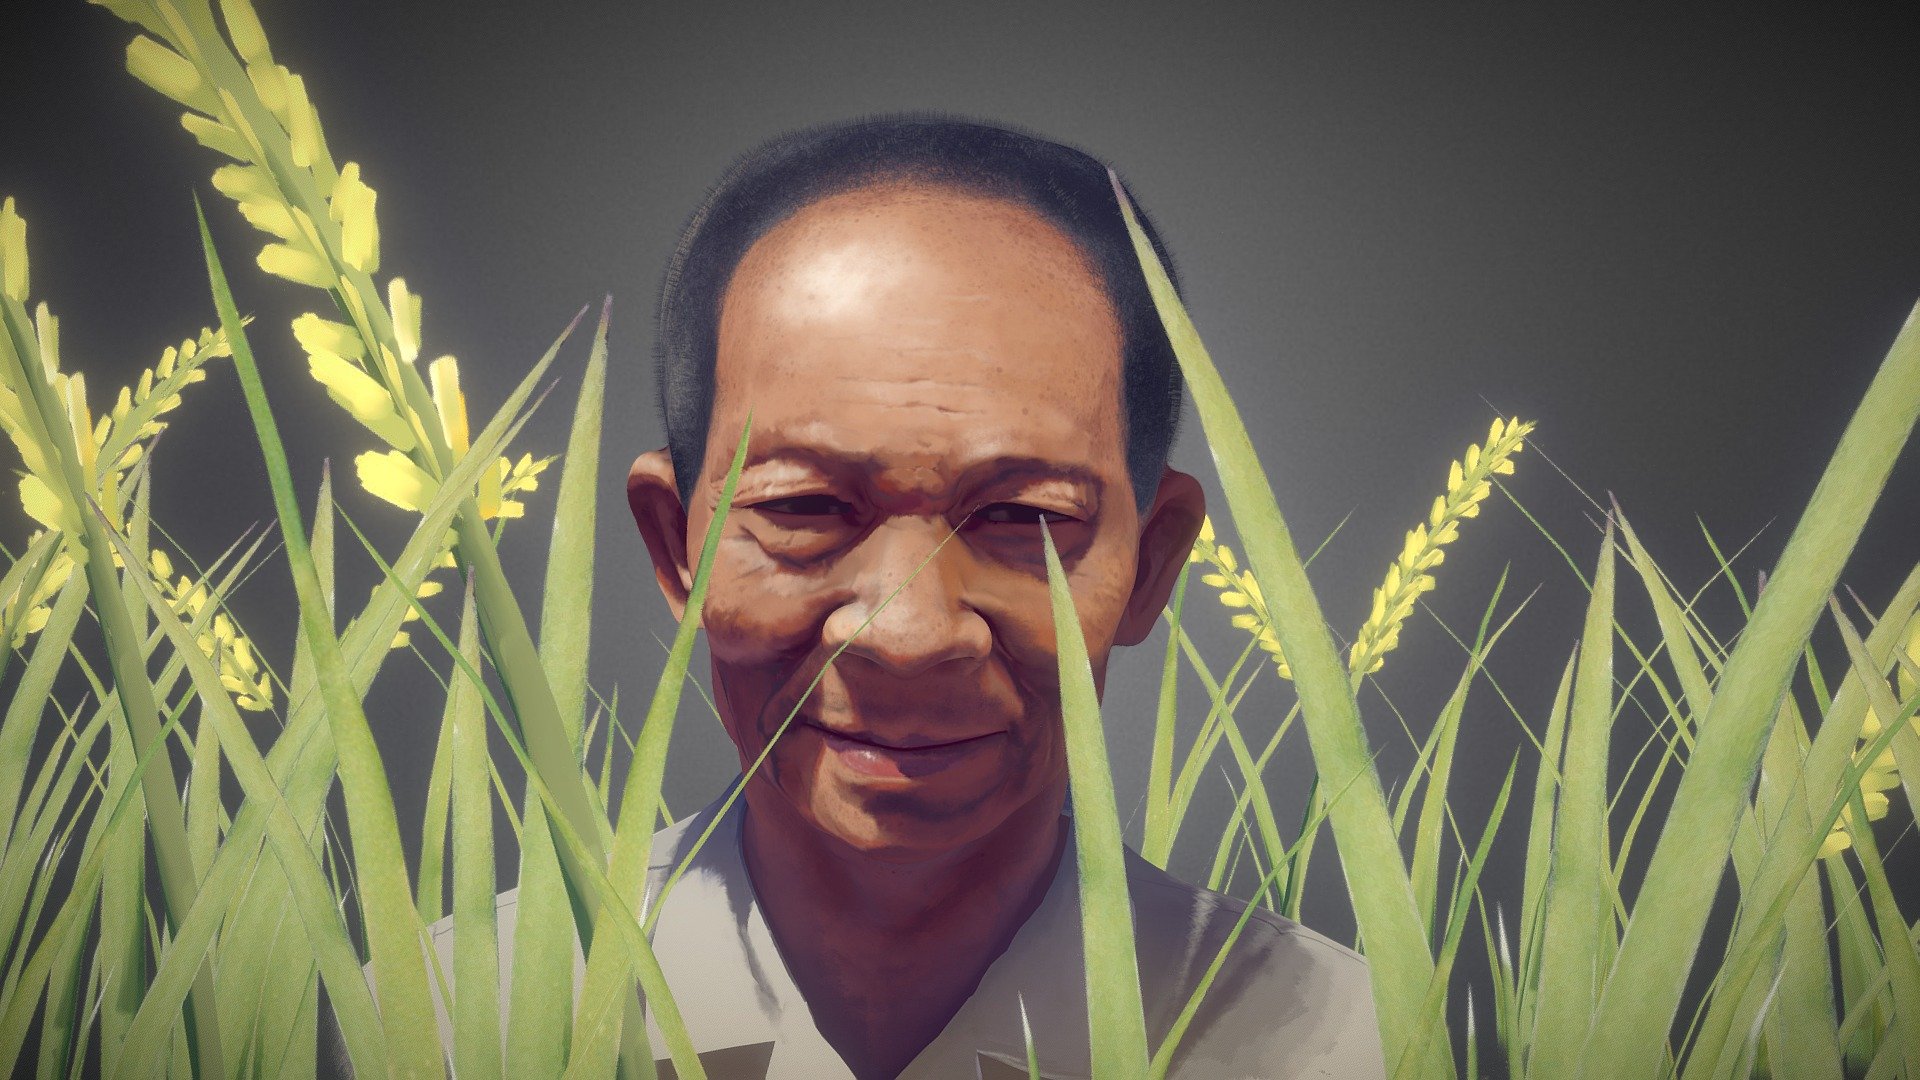 Professor Yuan（1930.9.7-2021.5.22） is widely acknowledged for the discovery of the genetic basis of heterosis in rice—a phenomenon in which the progeny of two distinctly different parents grow faster, yield more, and resist stress better than either parent.
Professor Yuan’s pioneering research has helped transform China from food deficiency to food security within three decades. His accomplishments and clear vision helped create a more abundant food supply and, through food security, a more stable world. Professor Yuan’s distinguished life’s work has caused many to call him the “Father of Hybrid Rice,” while his continuing research offers even more promise for world food security and adequate nutrition for the world’s poor 3d model